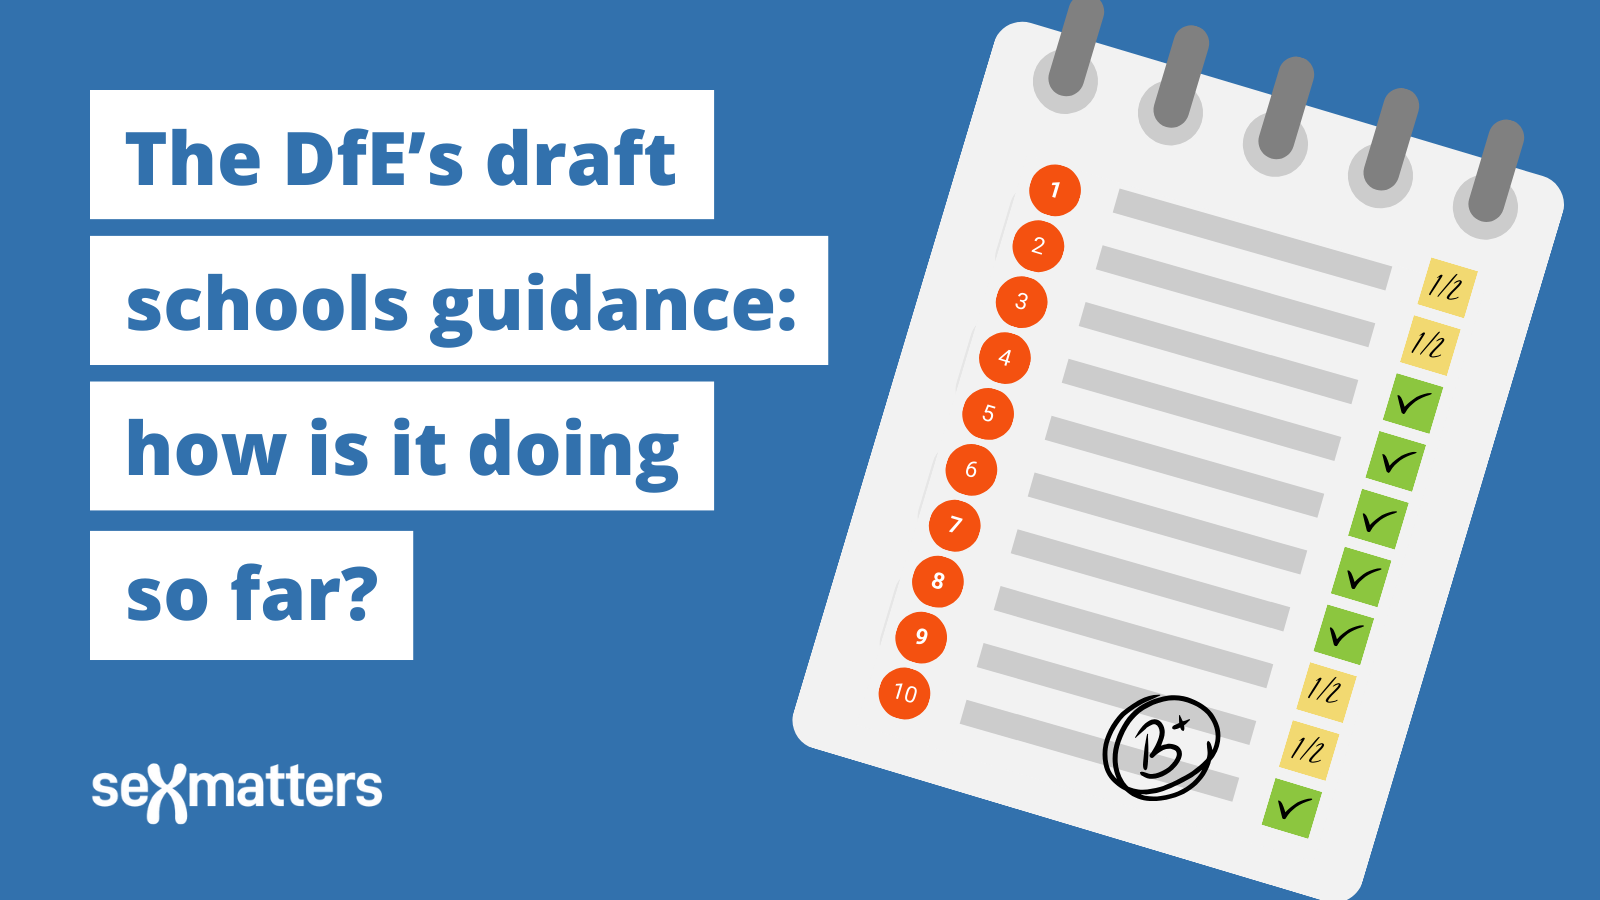 The DfE’s draft schools guidance: how is it doing so far?